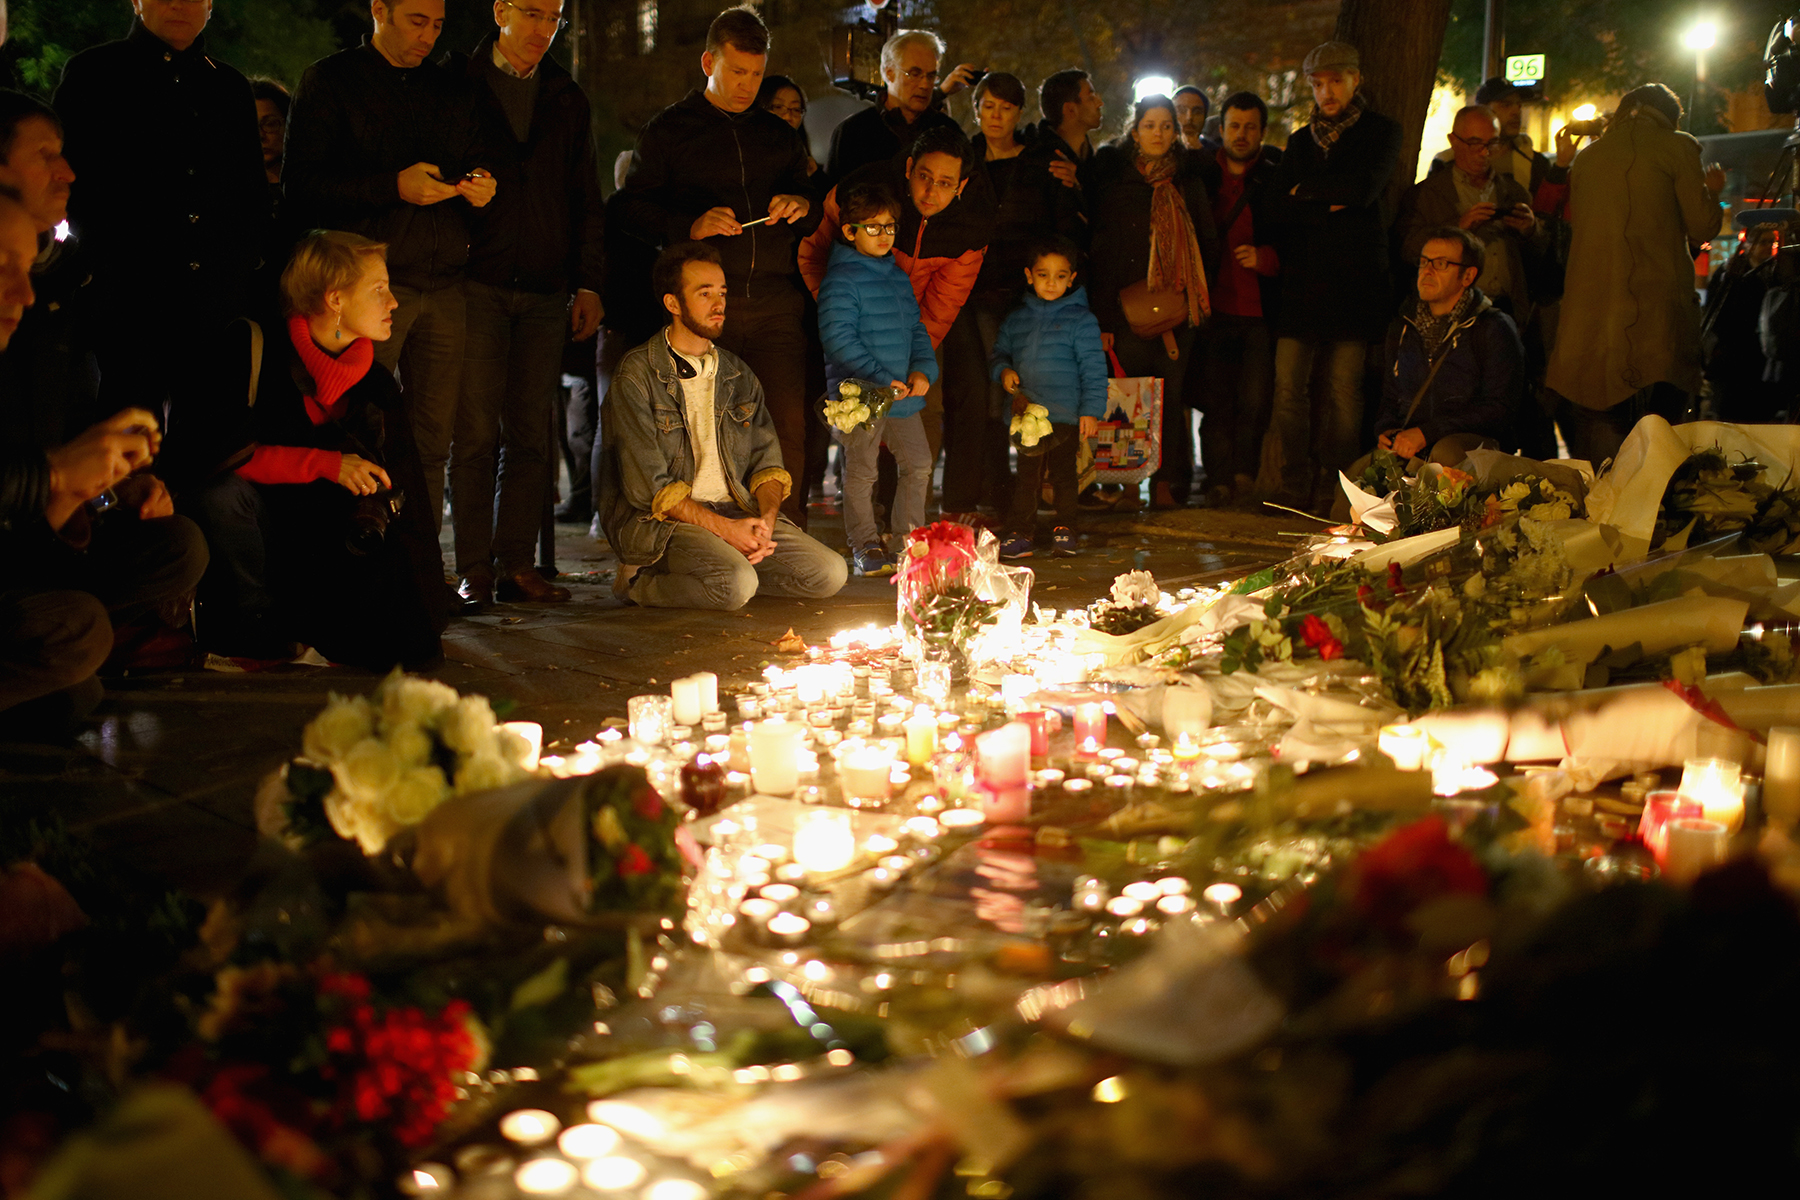 PHOTO: Flowers and candles are left on the pavement near the scene of yesterday's Bataclan Theater terrorist attacks, Nov. 14, 2015 in Paris.